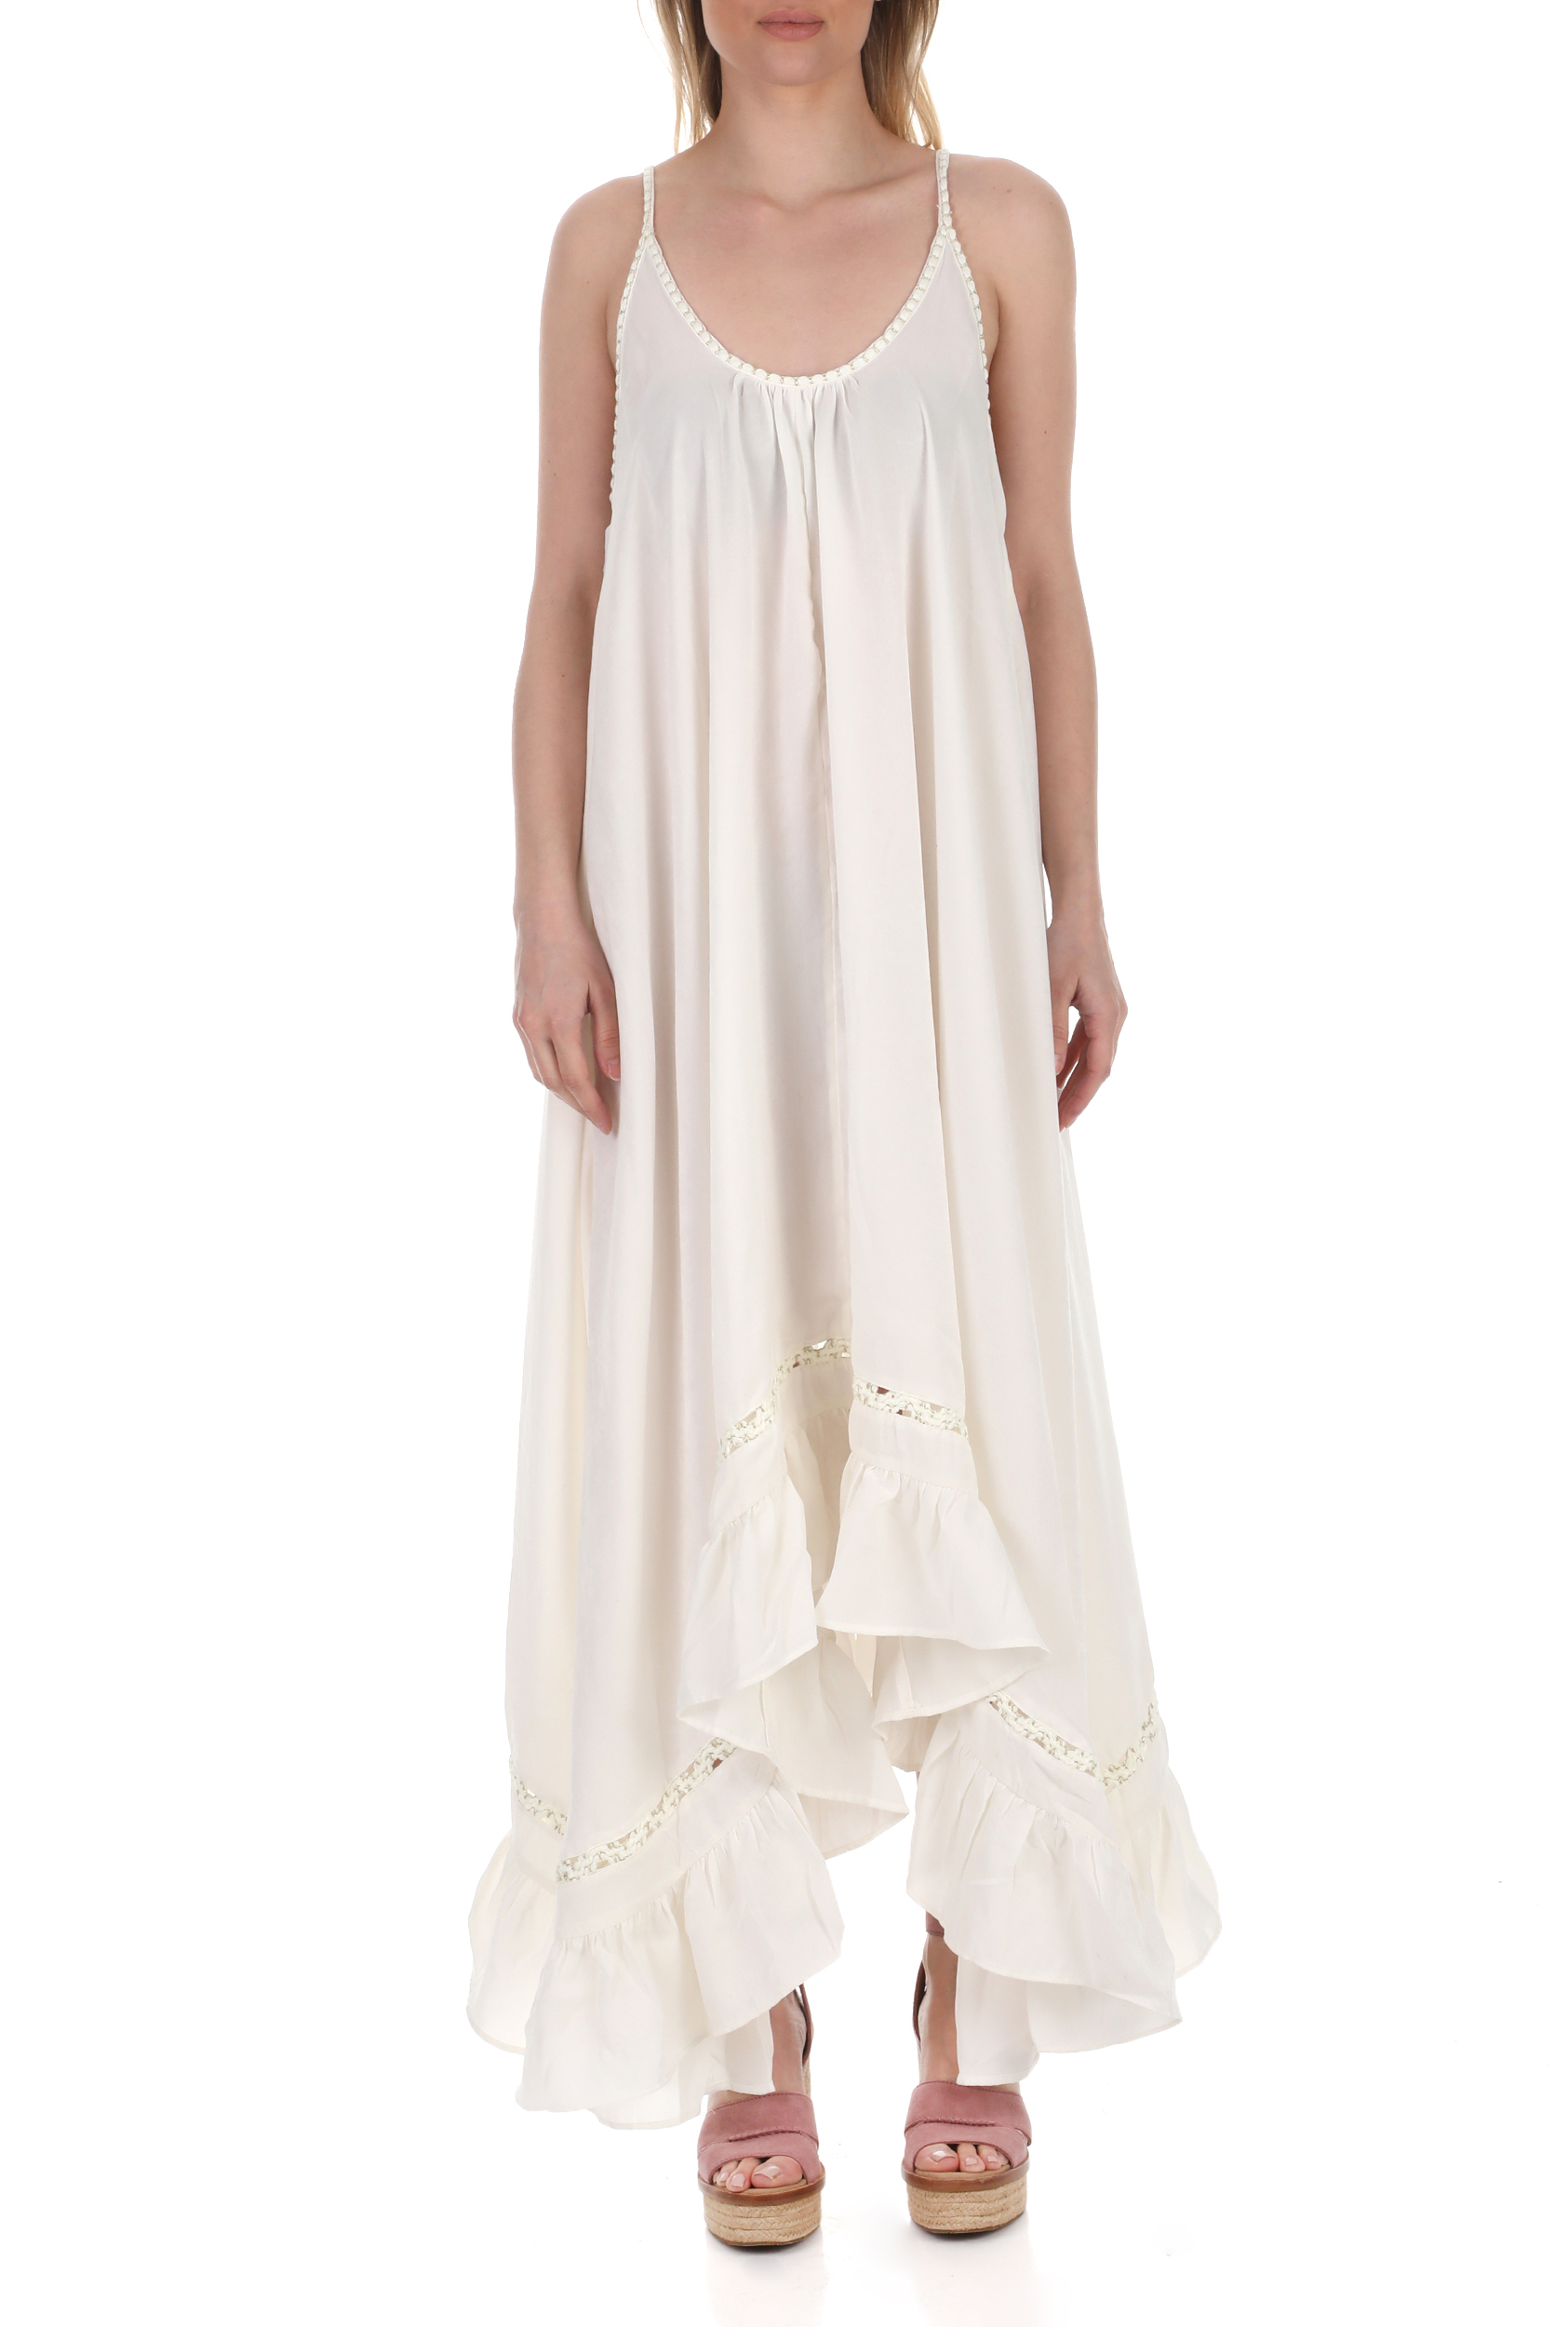 FREE PEOPLE COLLECTION – Γυναικειο maxi φορεμα FREE PEOPLE AMOR λευκο